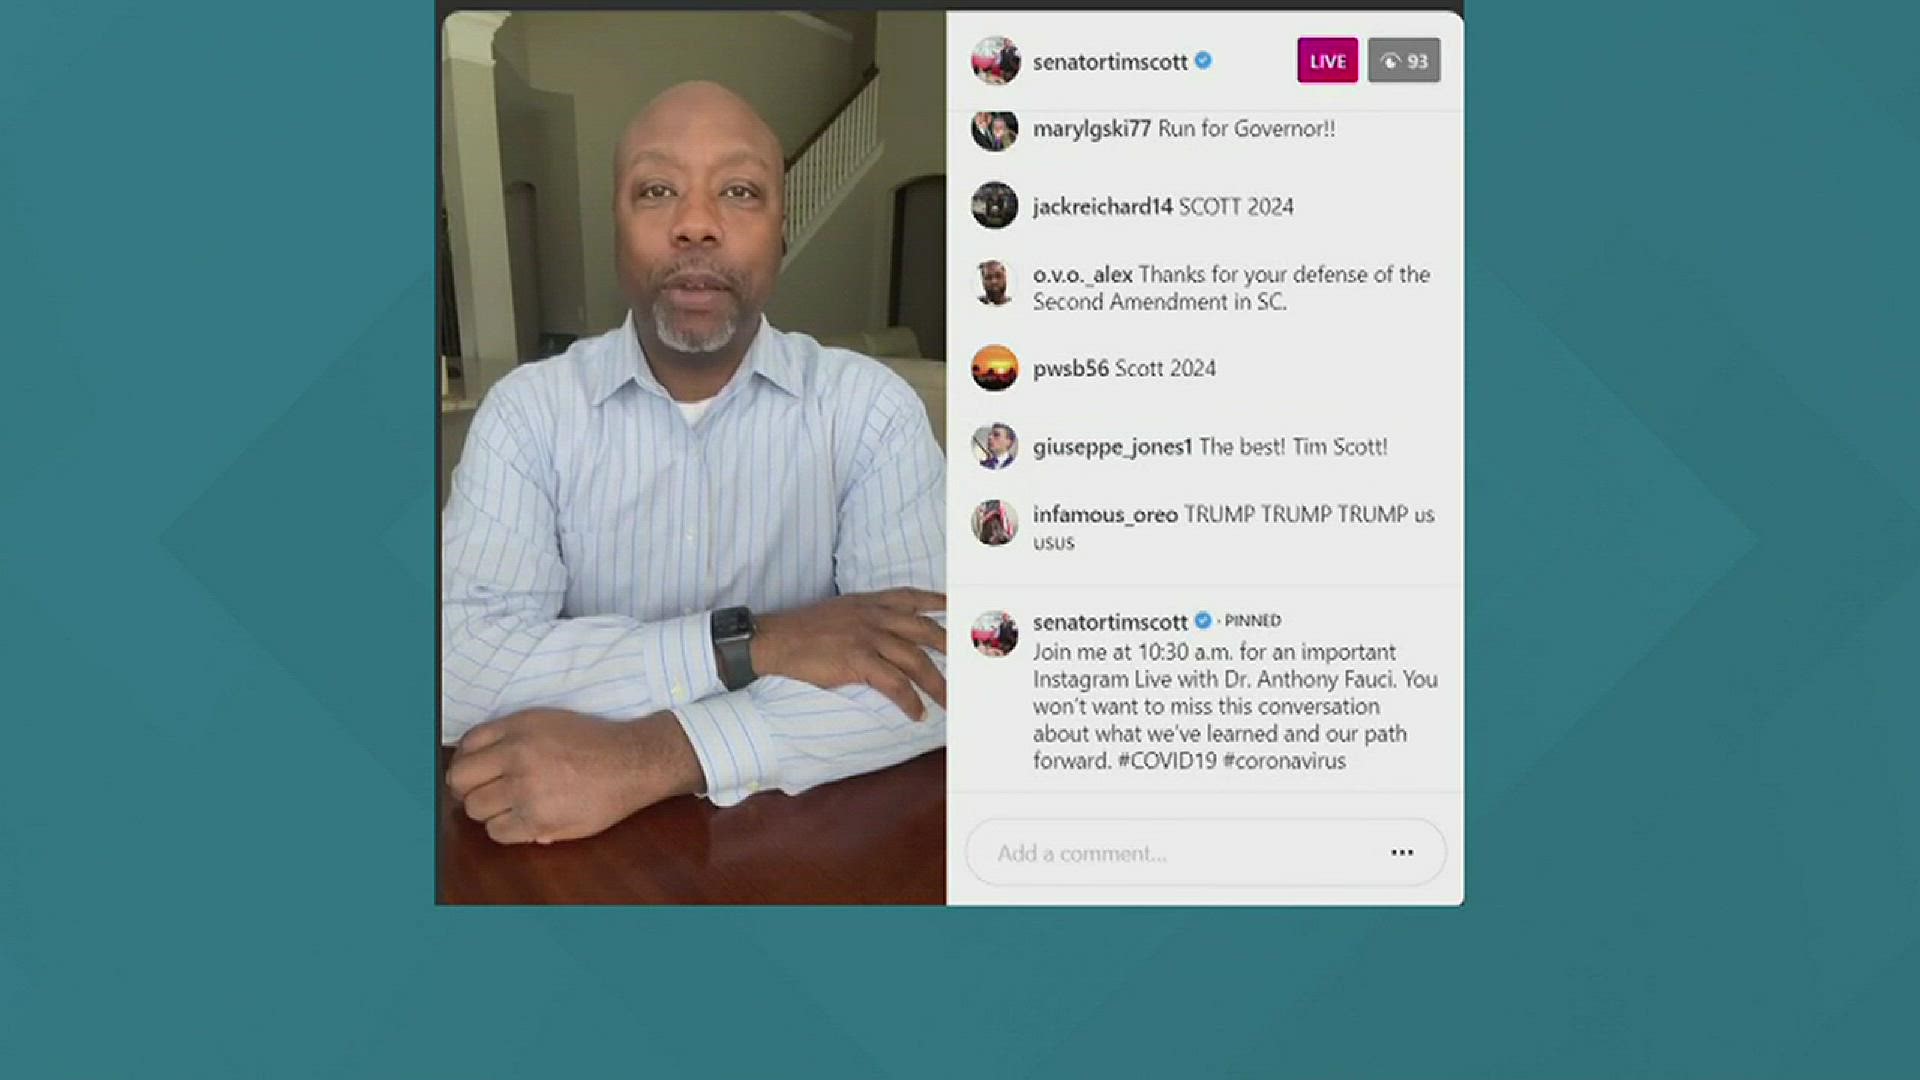 Sen Tim Scott hosts an Instagram Live with Dr. Anthony Fauci discussing COVID19 and South Carolina.